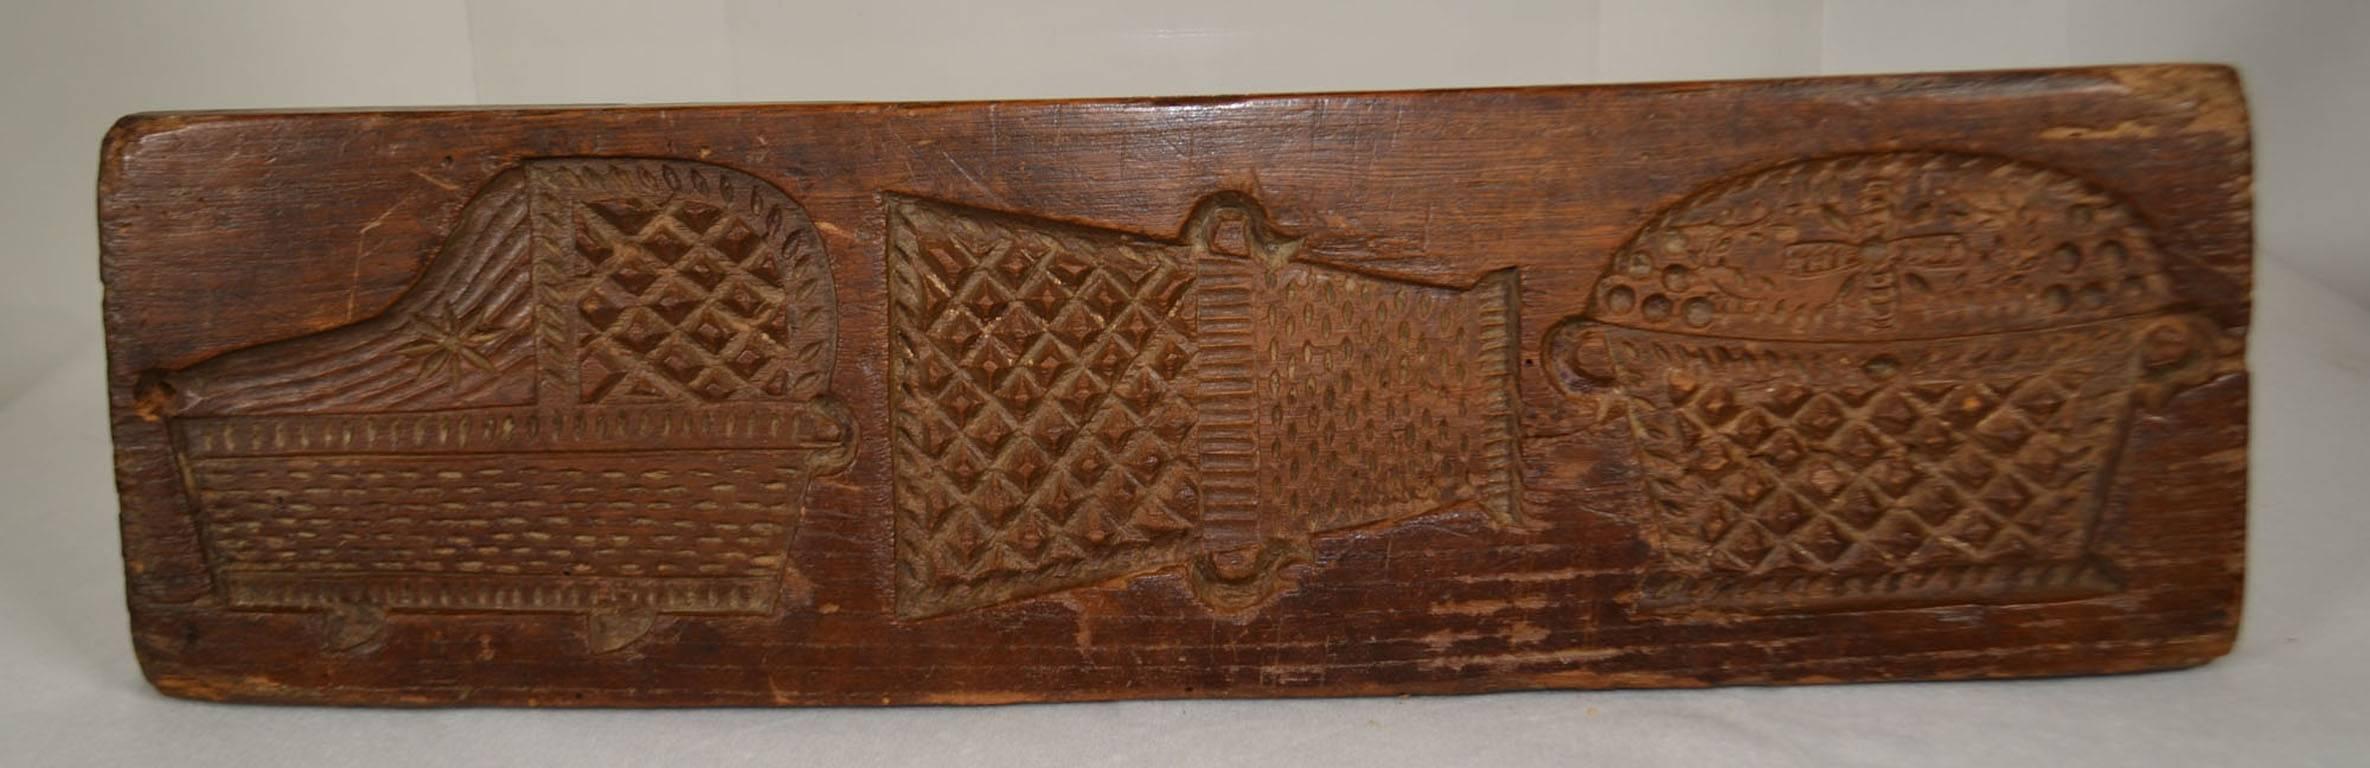 Double Sided Wooden Gingerbread Mold (Man, Woman, Deer, Monkey pushing cart) other side (two baskets and a bassinet)
Circa 1860-80 Signed (see picture)